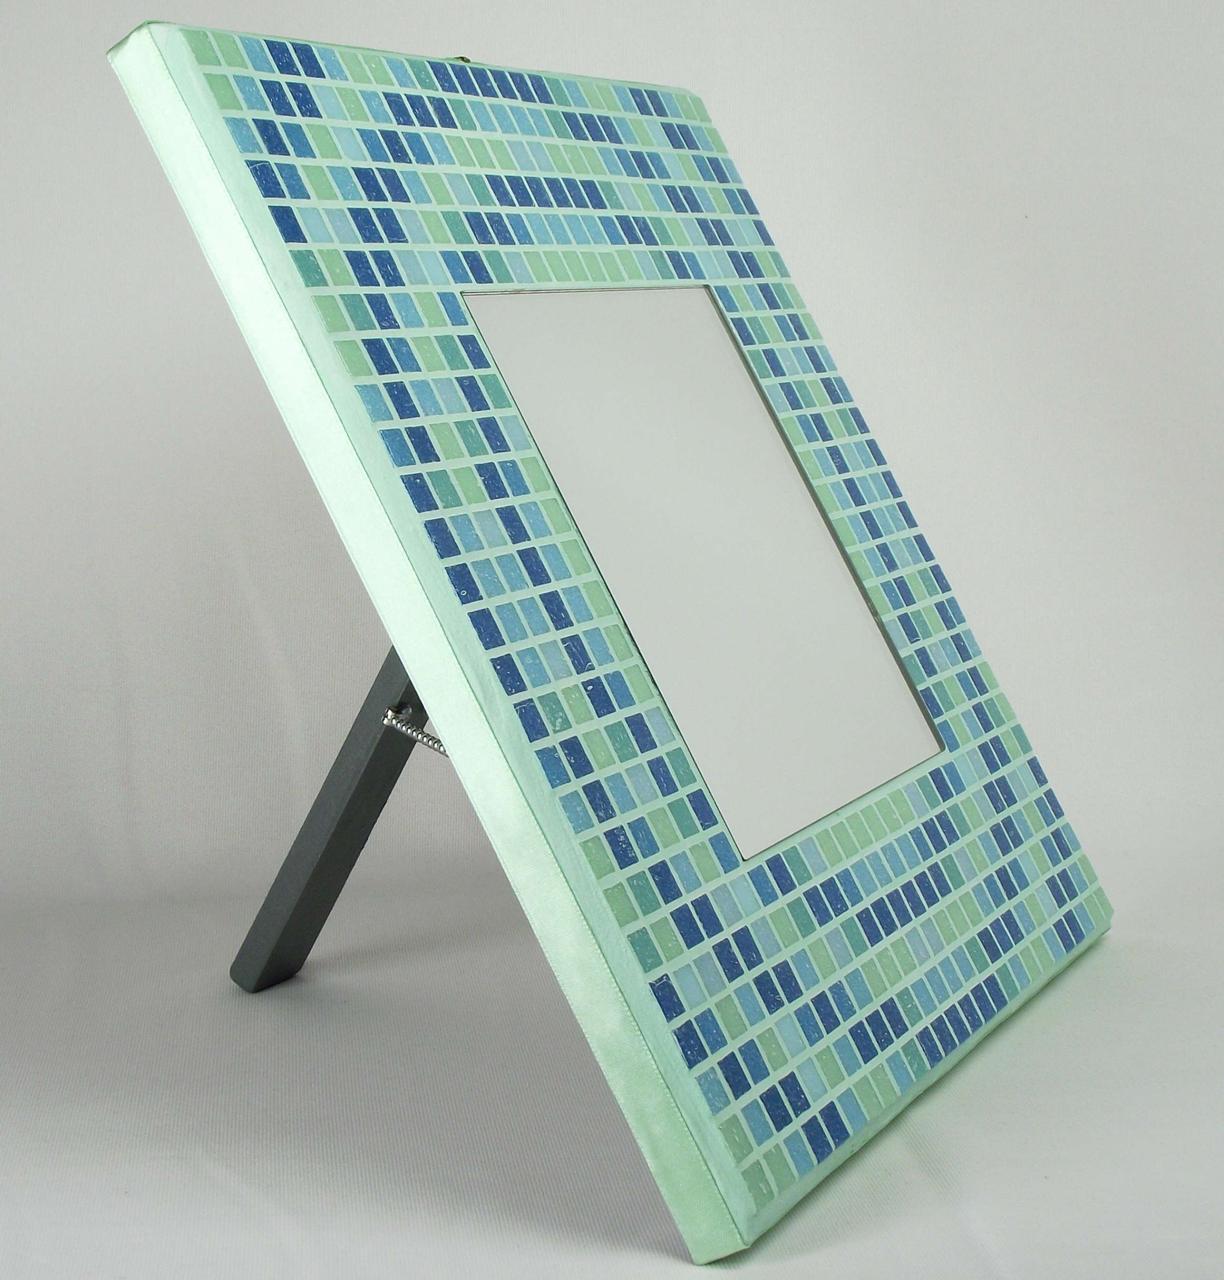 Concentric Glas 29cm Mosaic Mirror with Stand